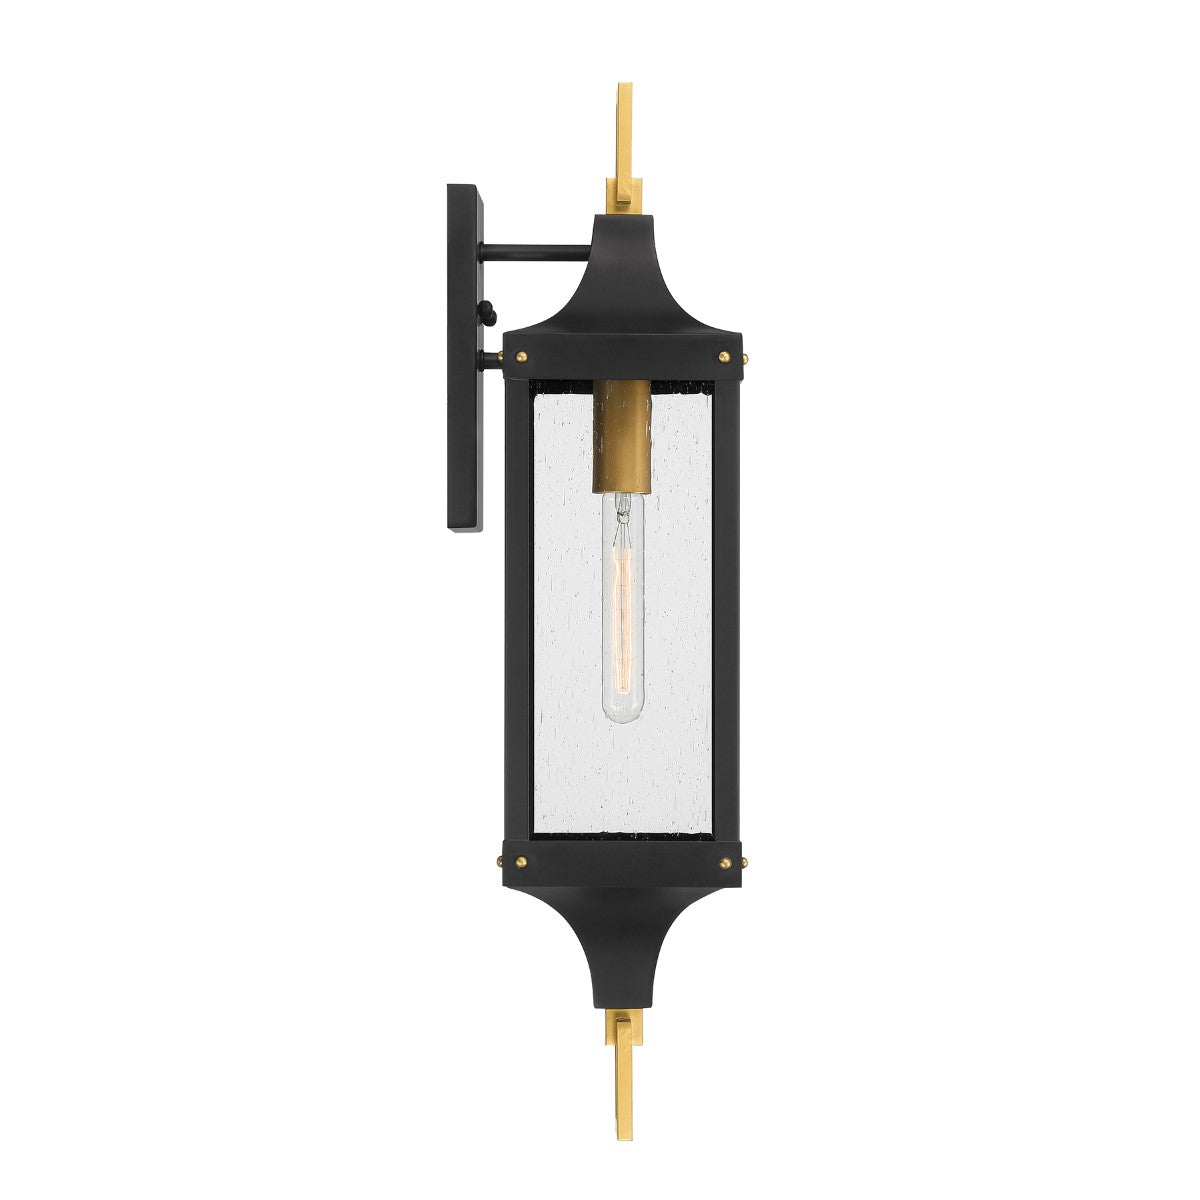 Glendale 28 in. Outdoor Wall Lantern Matte Black and Weathered Brushed Brass Finish